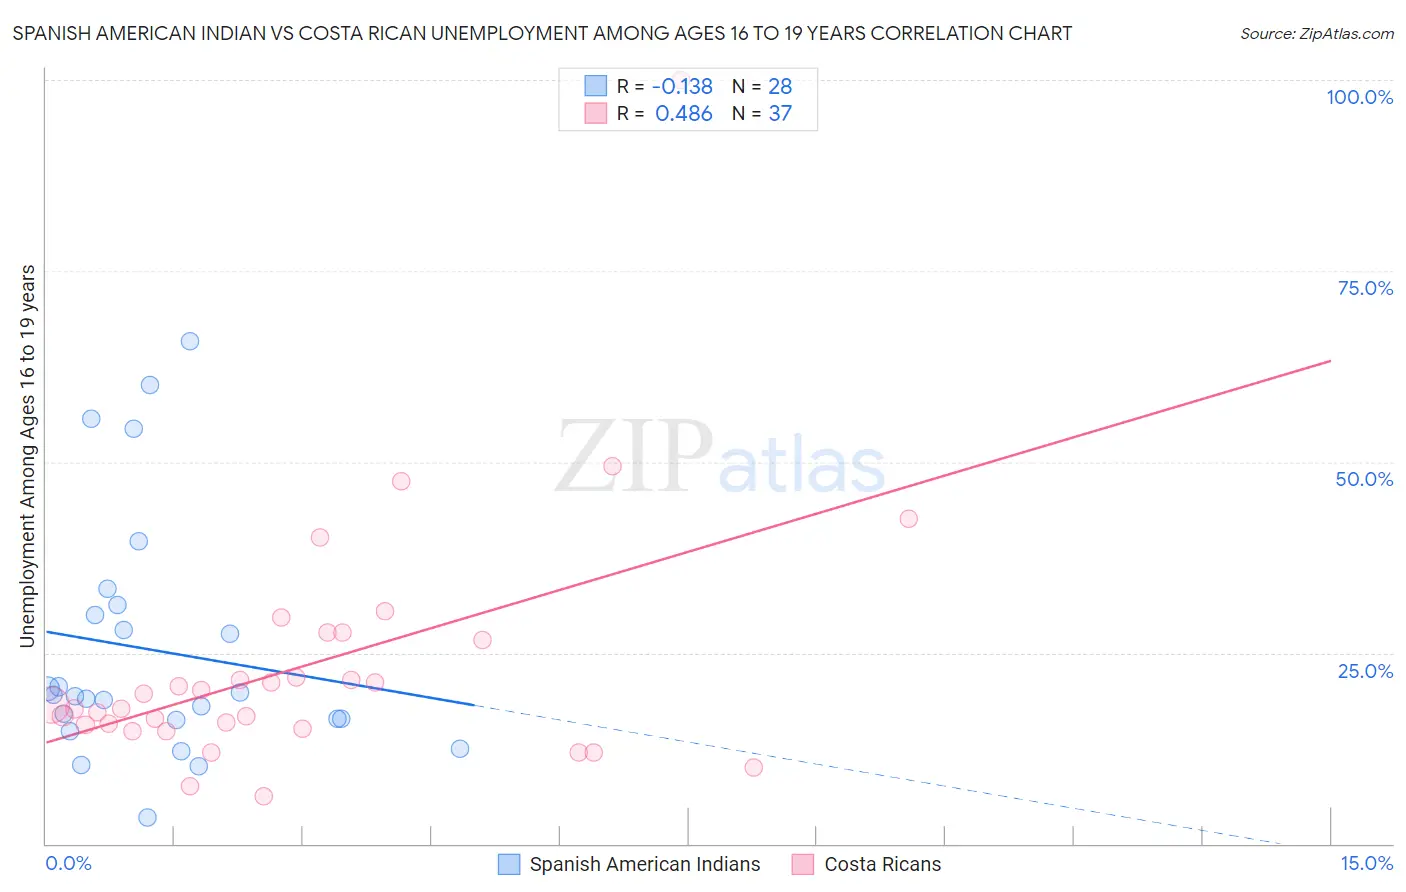 Spanish American Indian vs Costa Rican Unemployment Among Ages 16 to 19 years